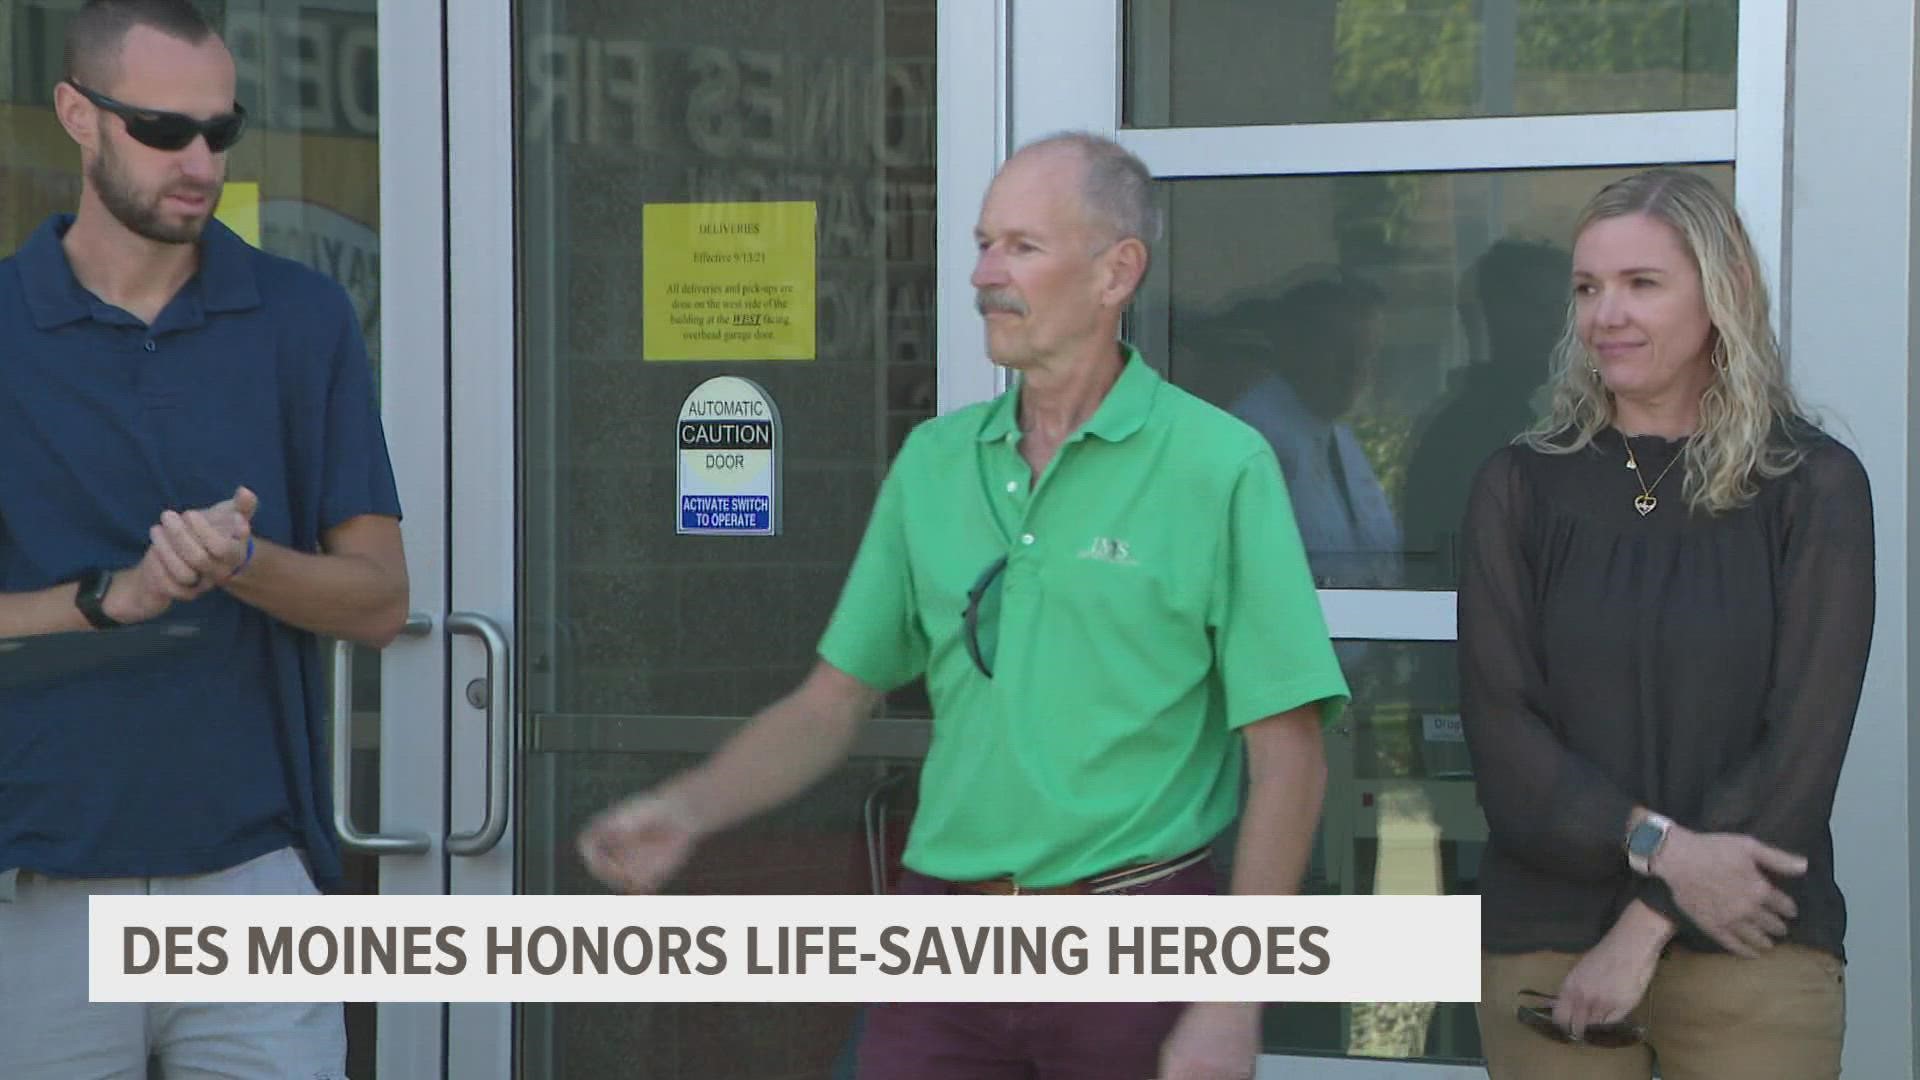 Before the assistance of the heroes, Brian Huber was pulseless and not breathing for nearly four minutes.